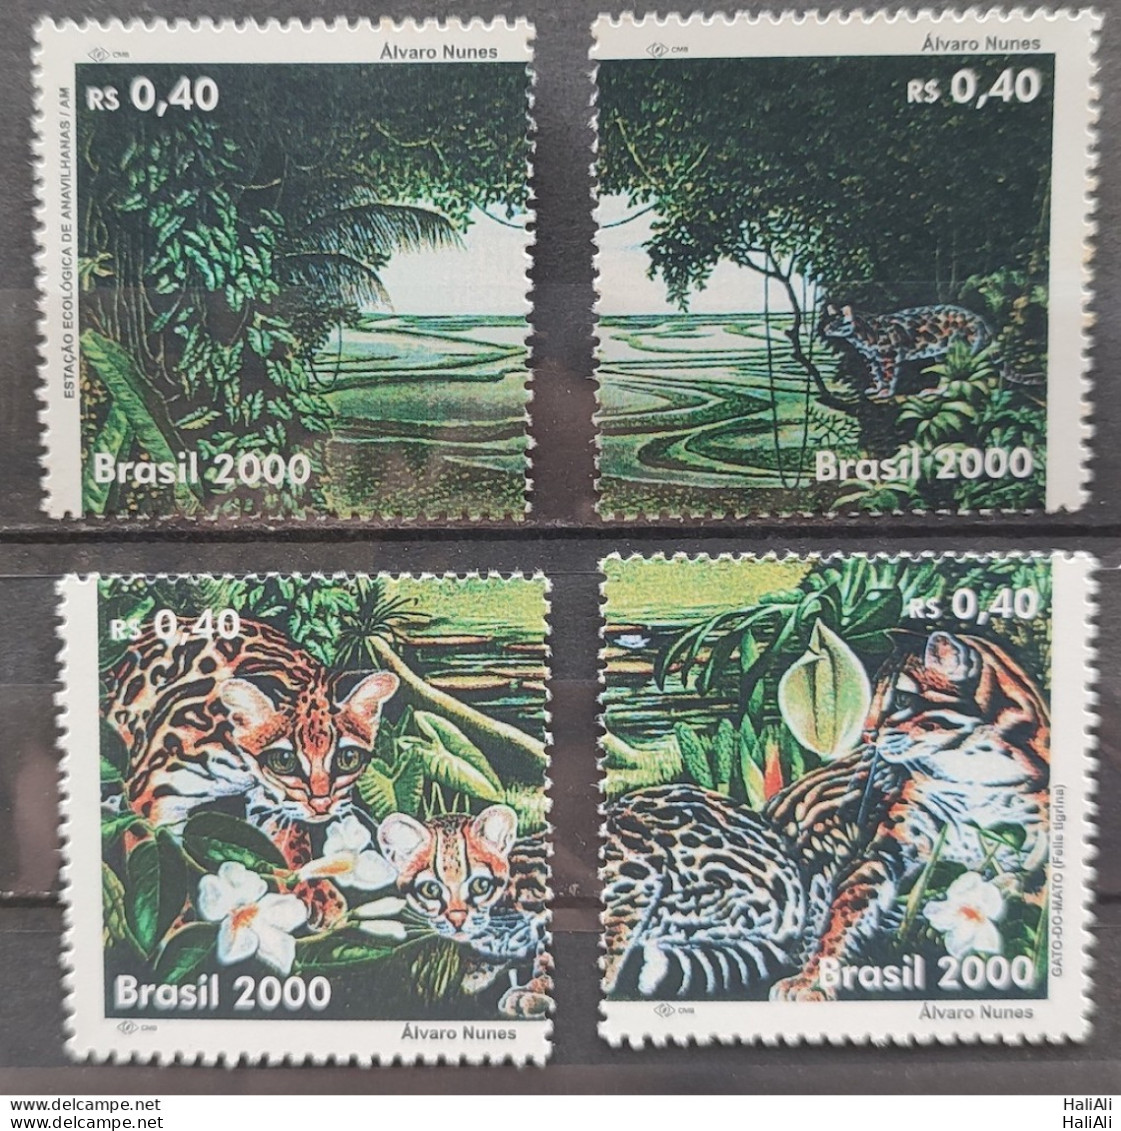 C 2285 Brazil Stamp Preservation Of The Environment Expo Cat Jaguar 2000 Complete Series Separate - Nuevos